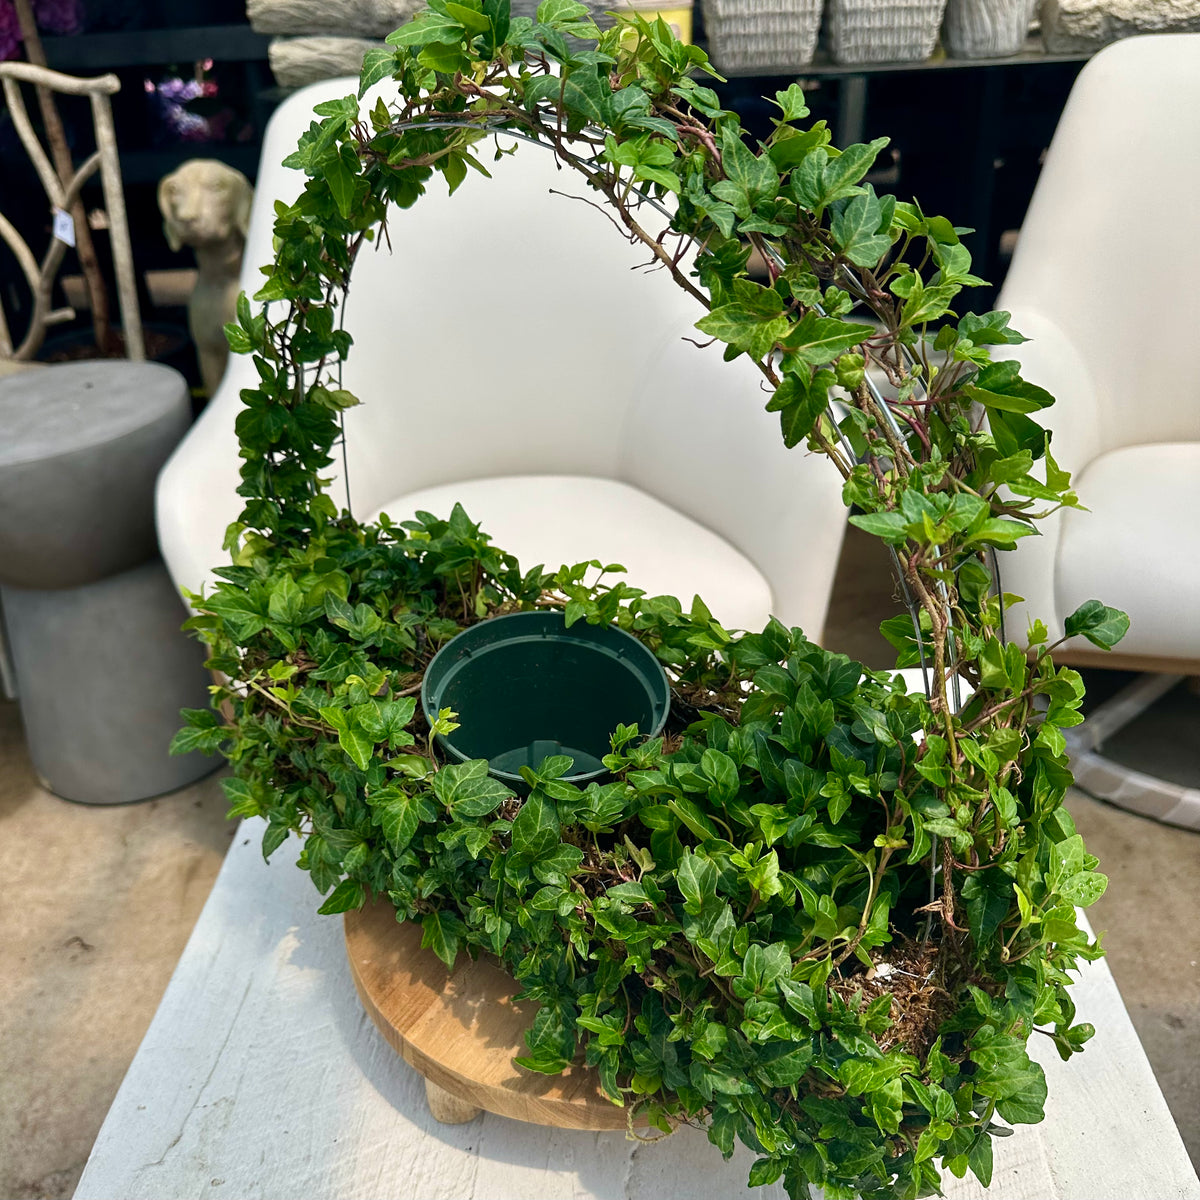 IVY TOPIARY BASKET SMALL